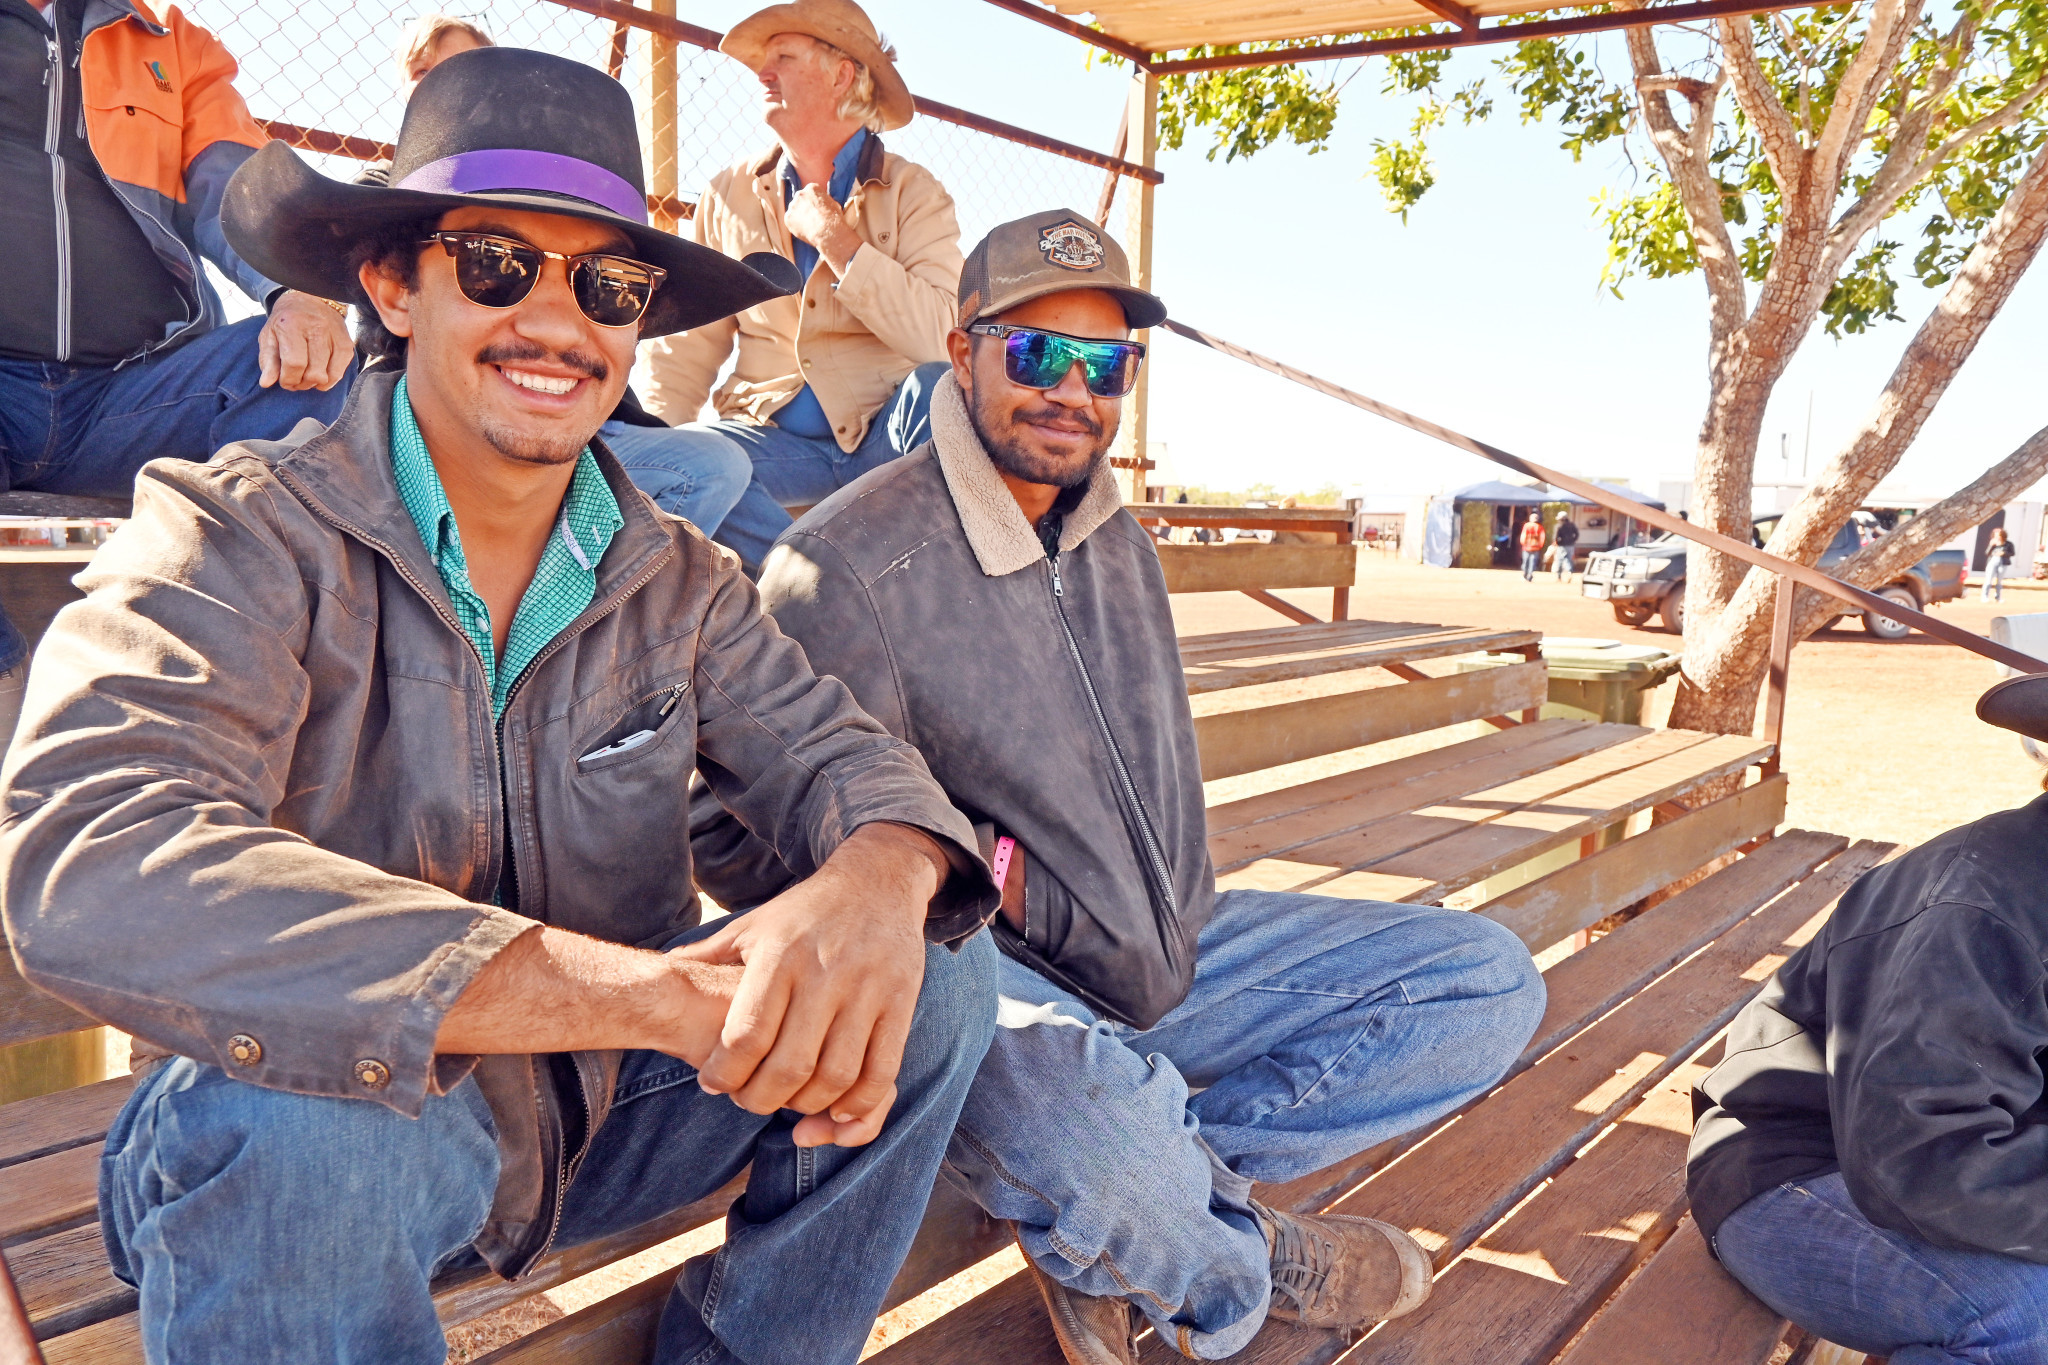 Isaiah Callope and Scotty Bowen at the Normanton Rodeo.